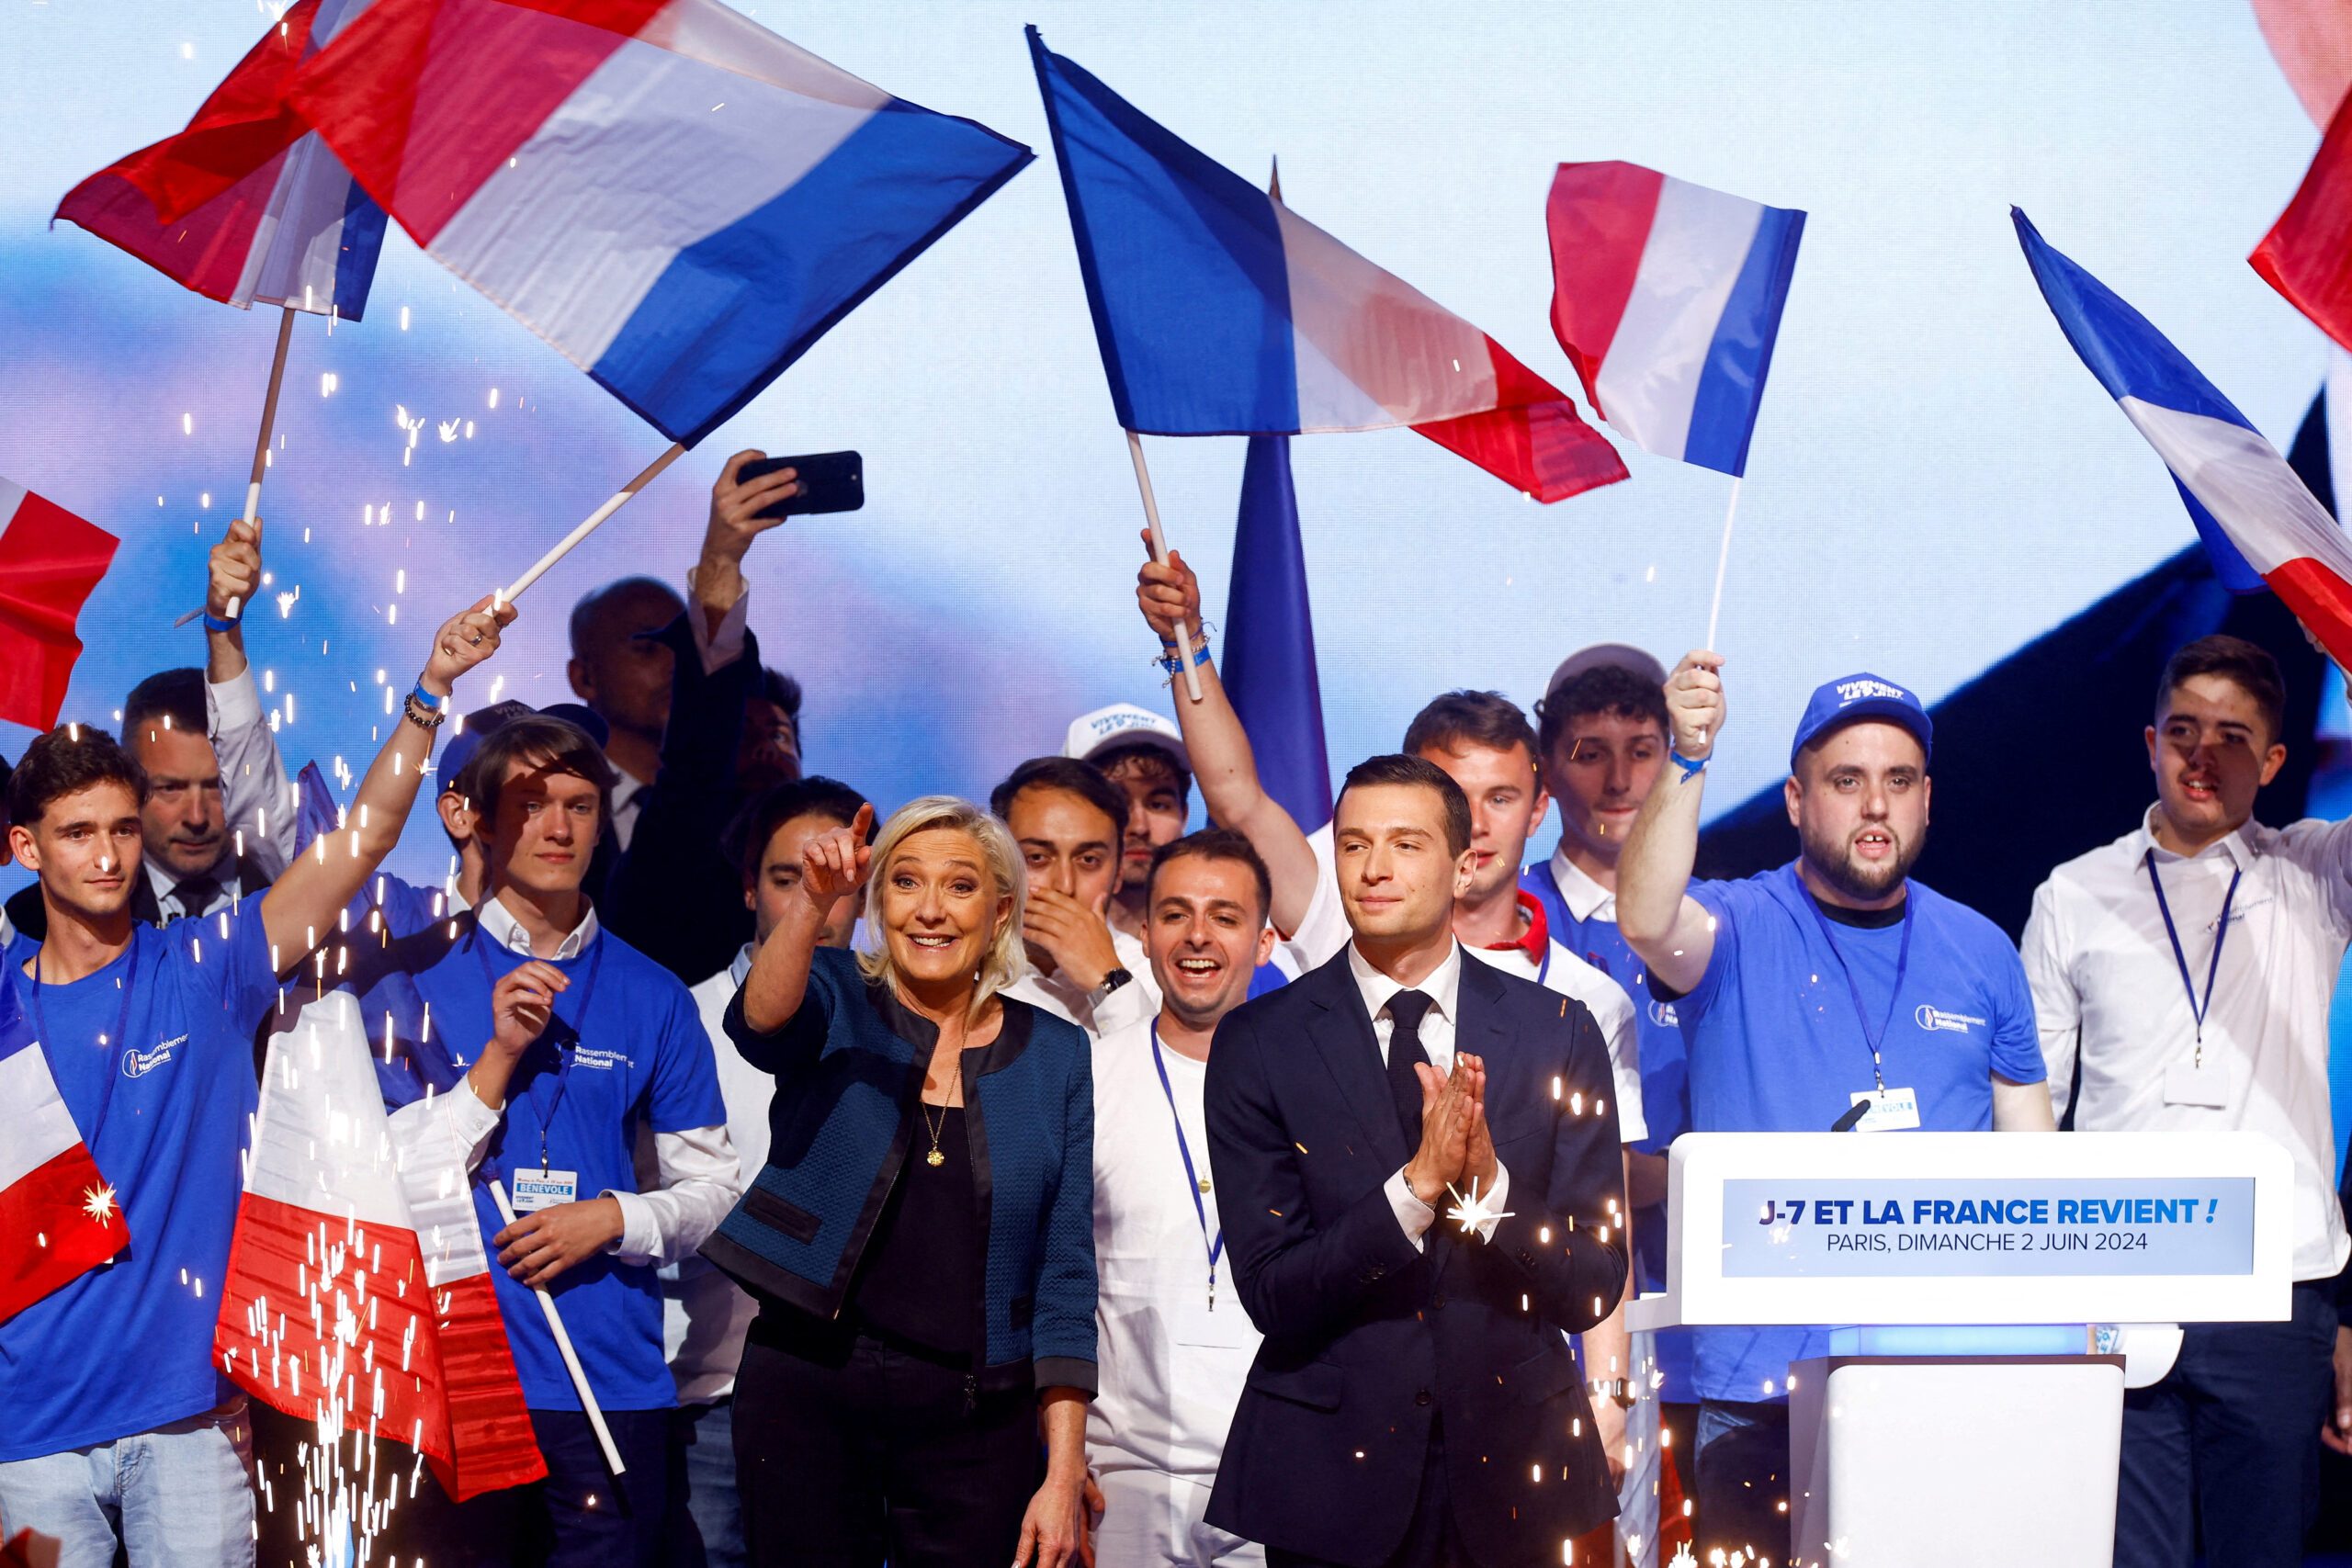 TIMELINE: The rise of France’s far right